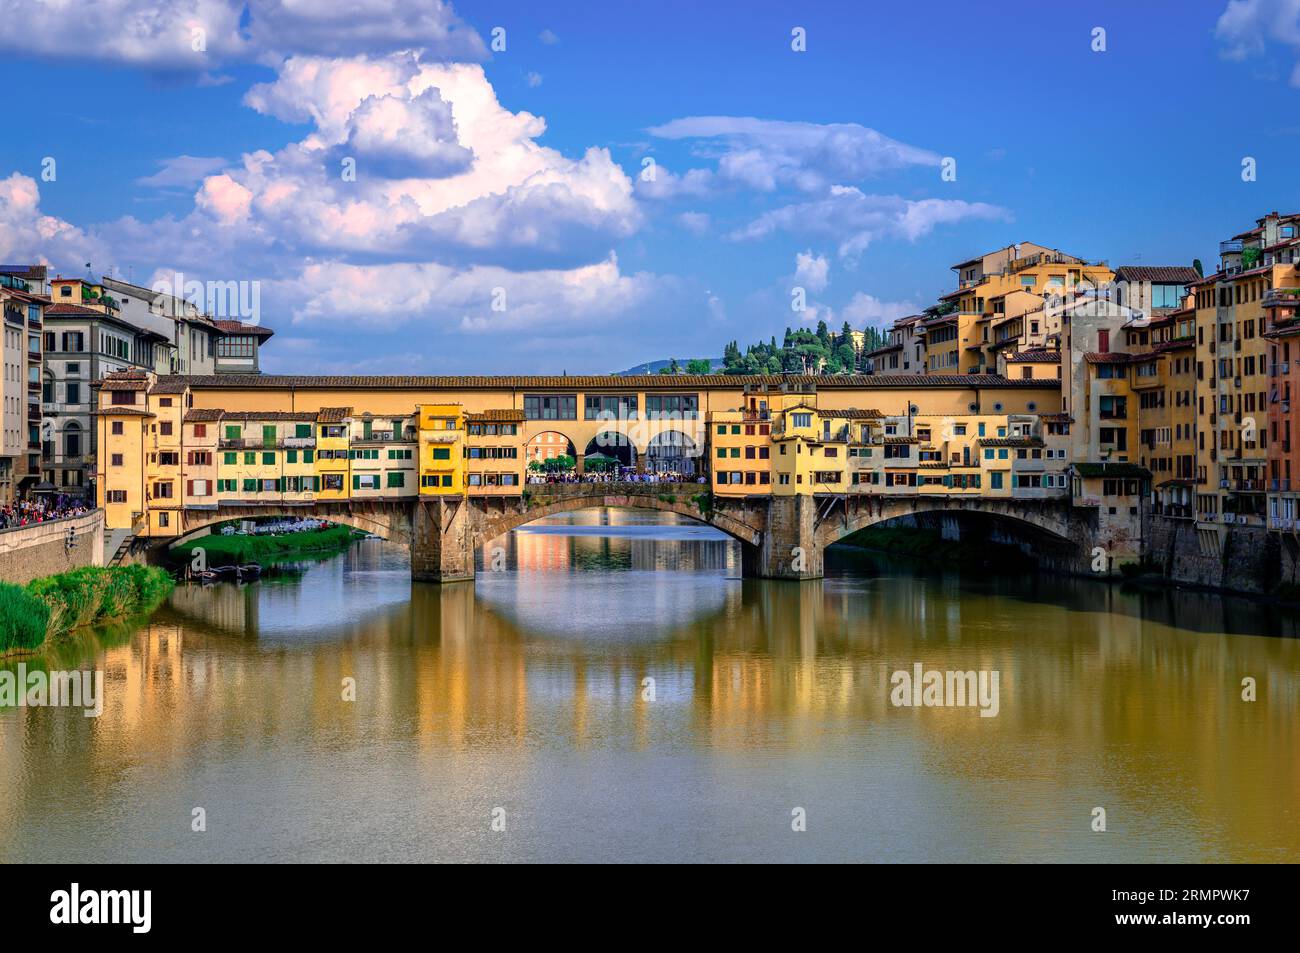 Ponte Vecchio (old Bridge) in Florence, Italy. This medieval stone bridge that spans river Arno, consists of three segmental arches and it has always Stock Photo